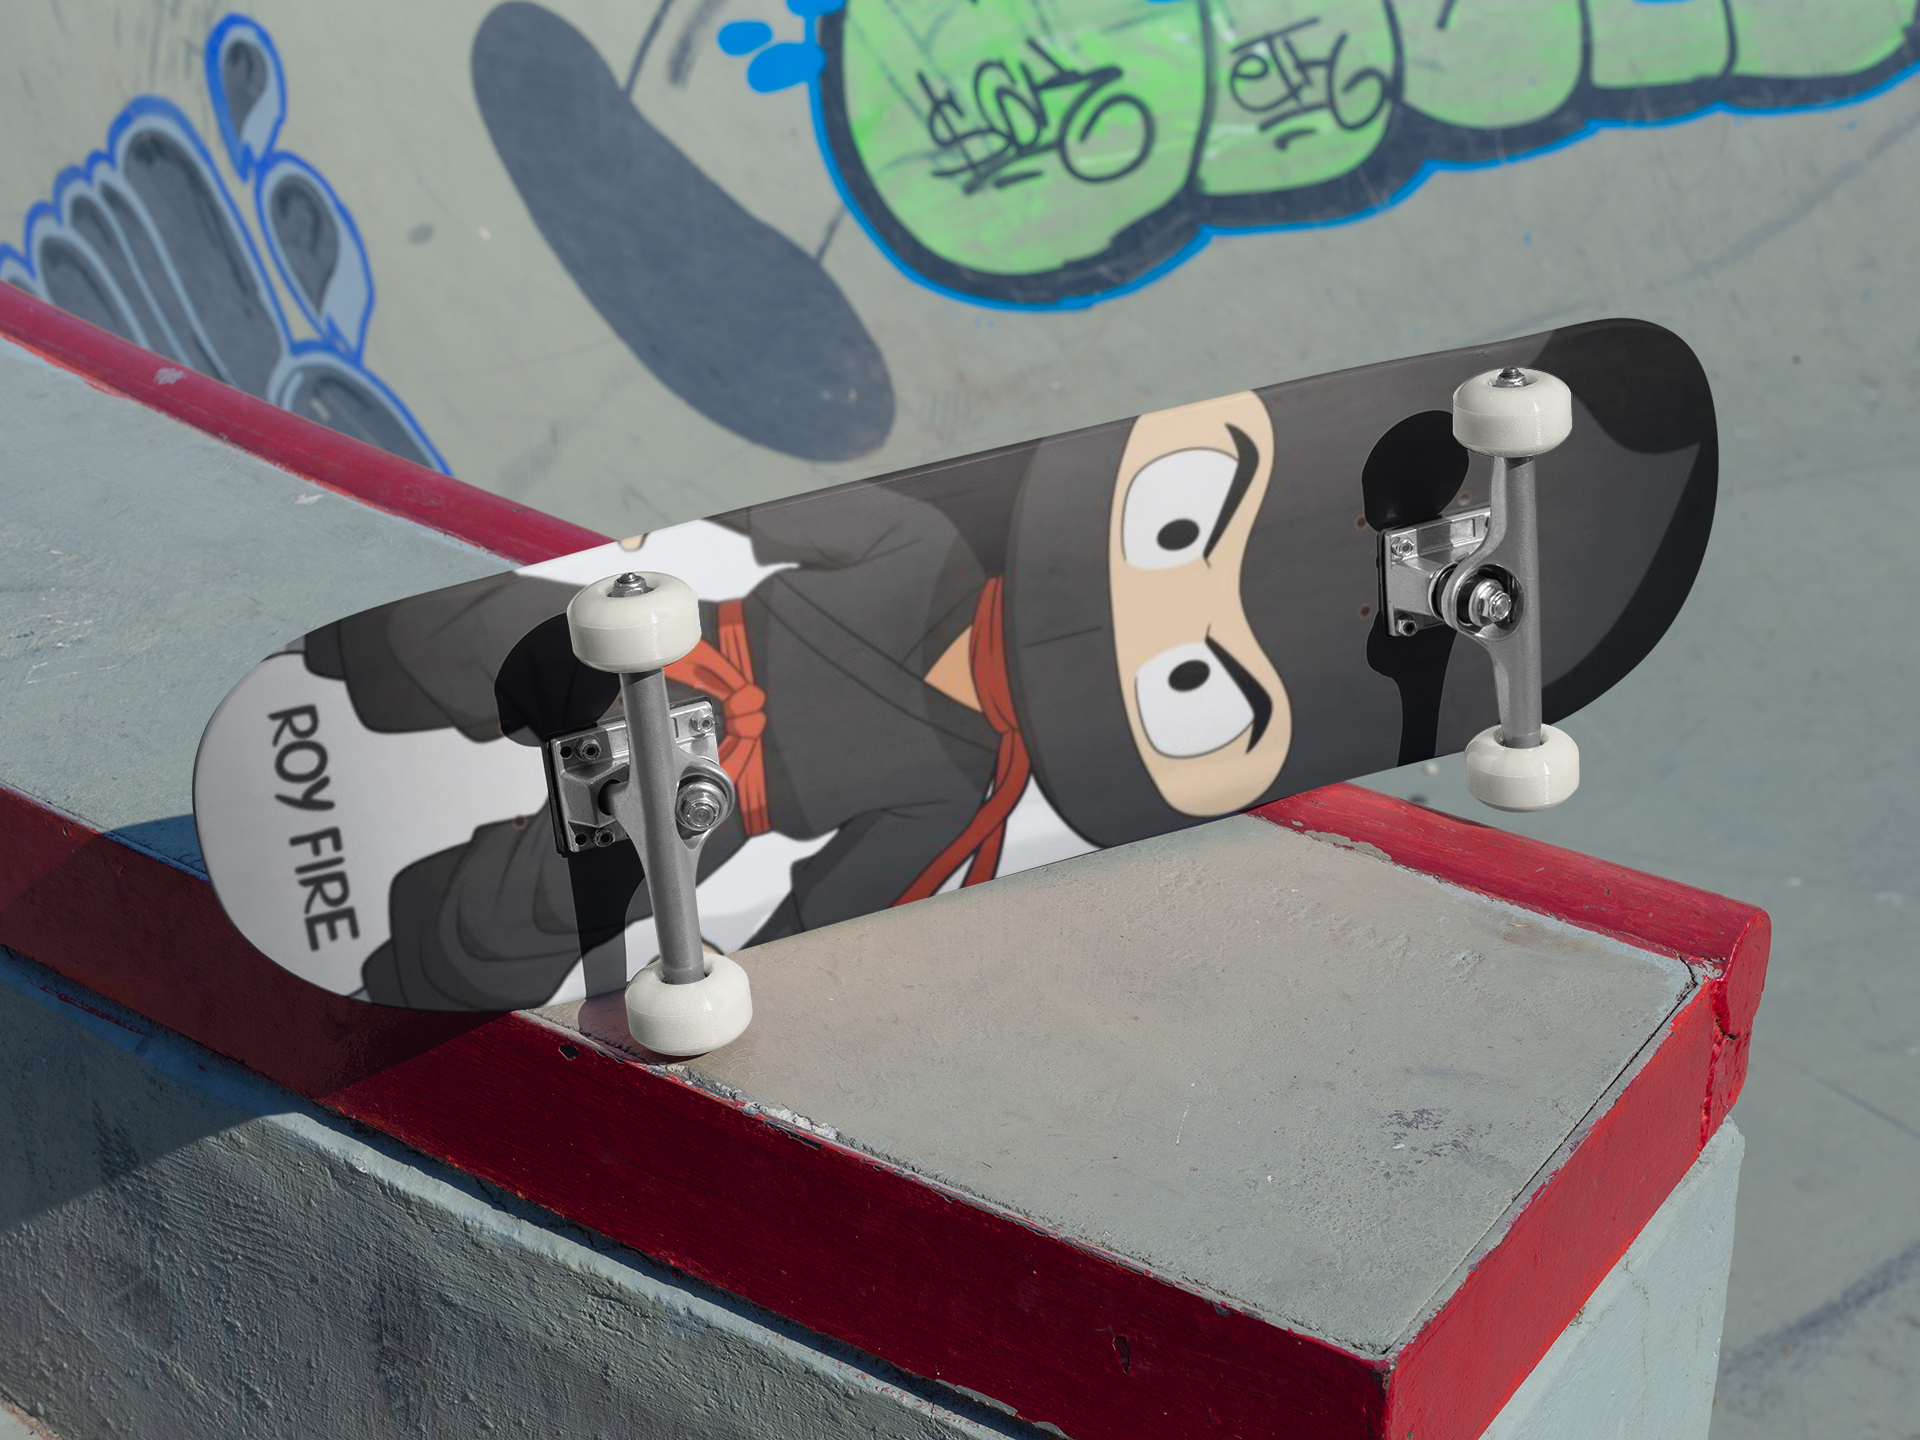 mockup-of-a-skateboard-lying-on-the-floor-at-a-skatepark-27193.png